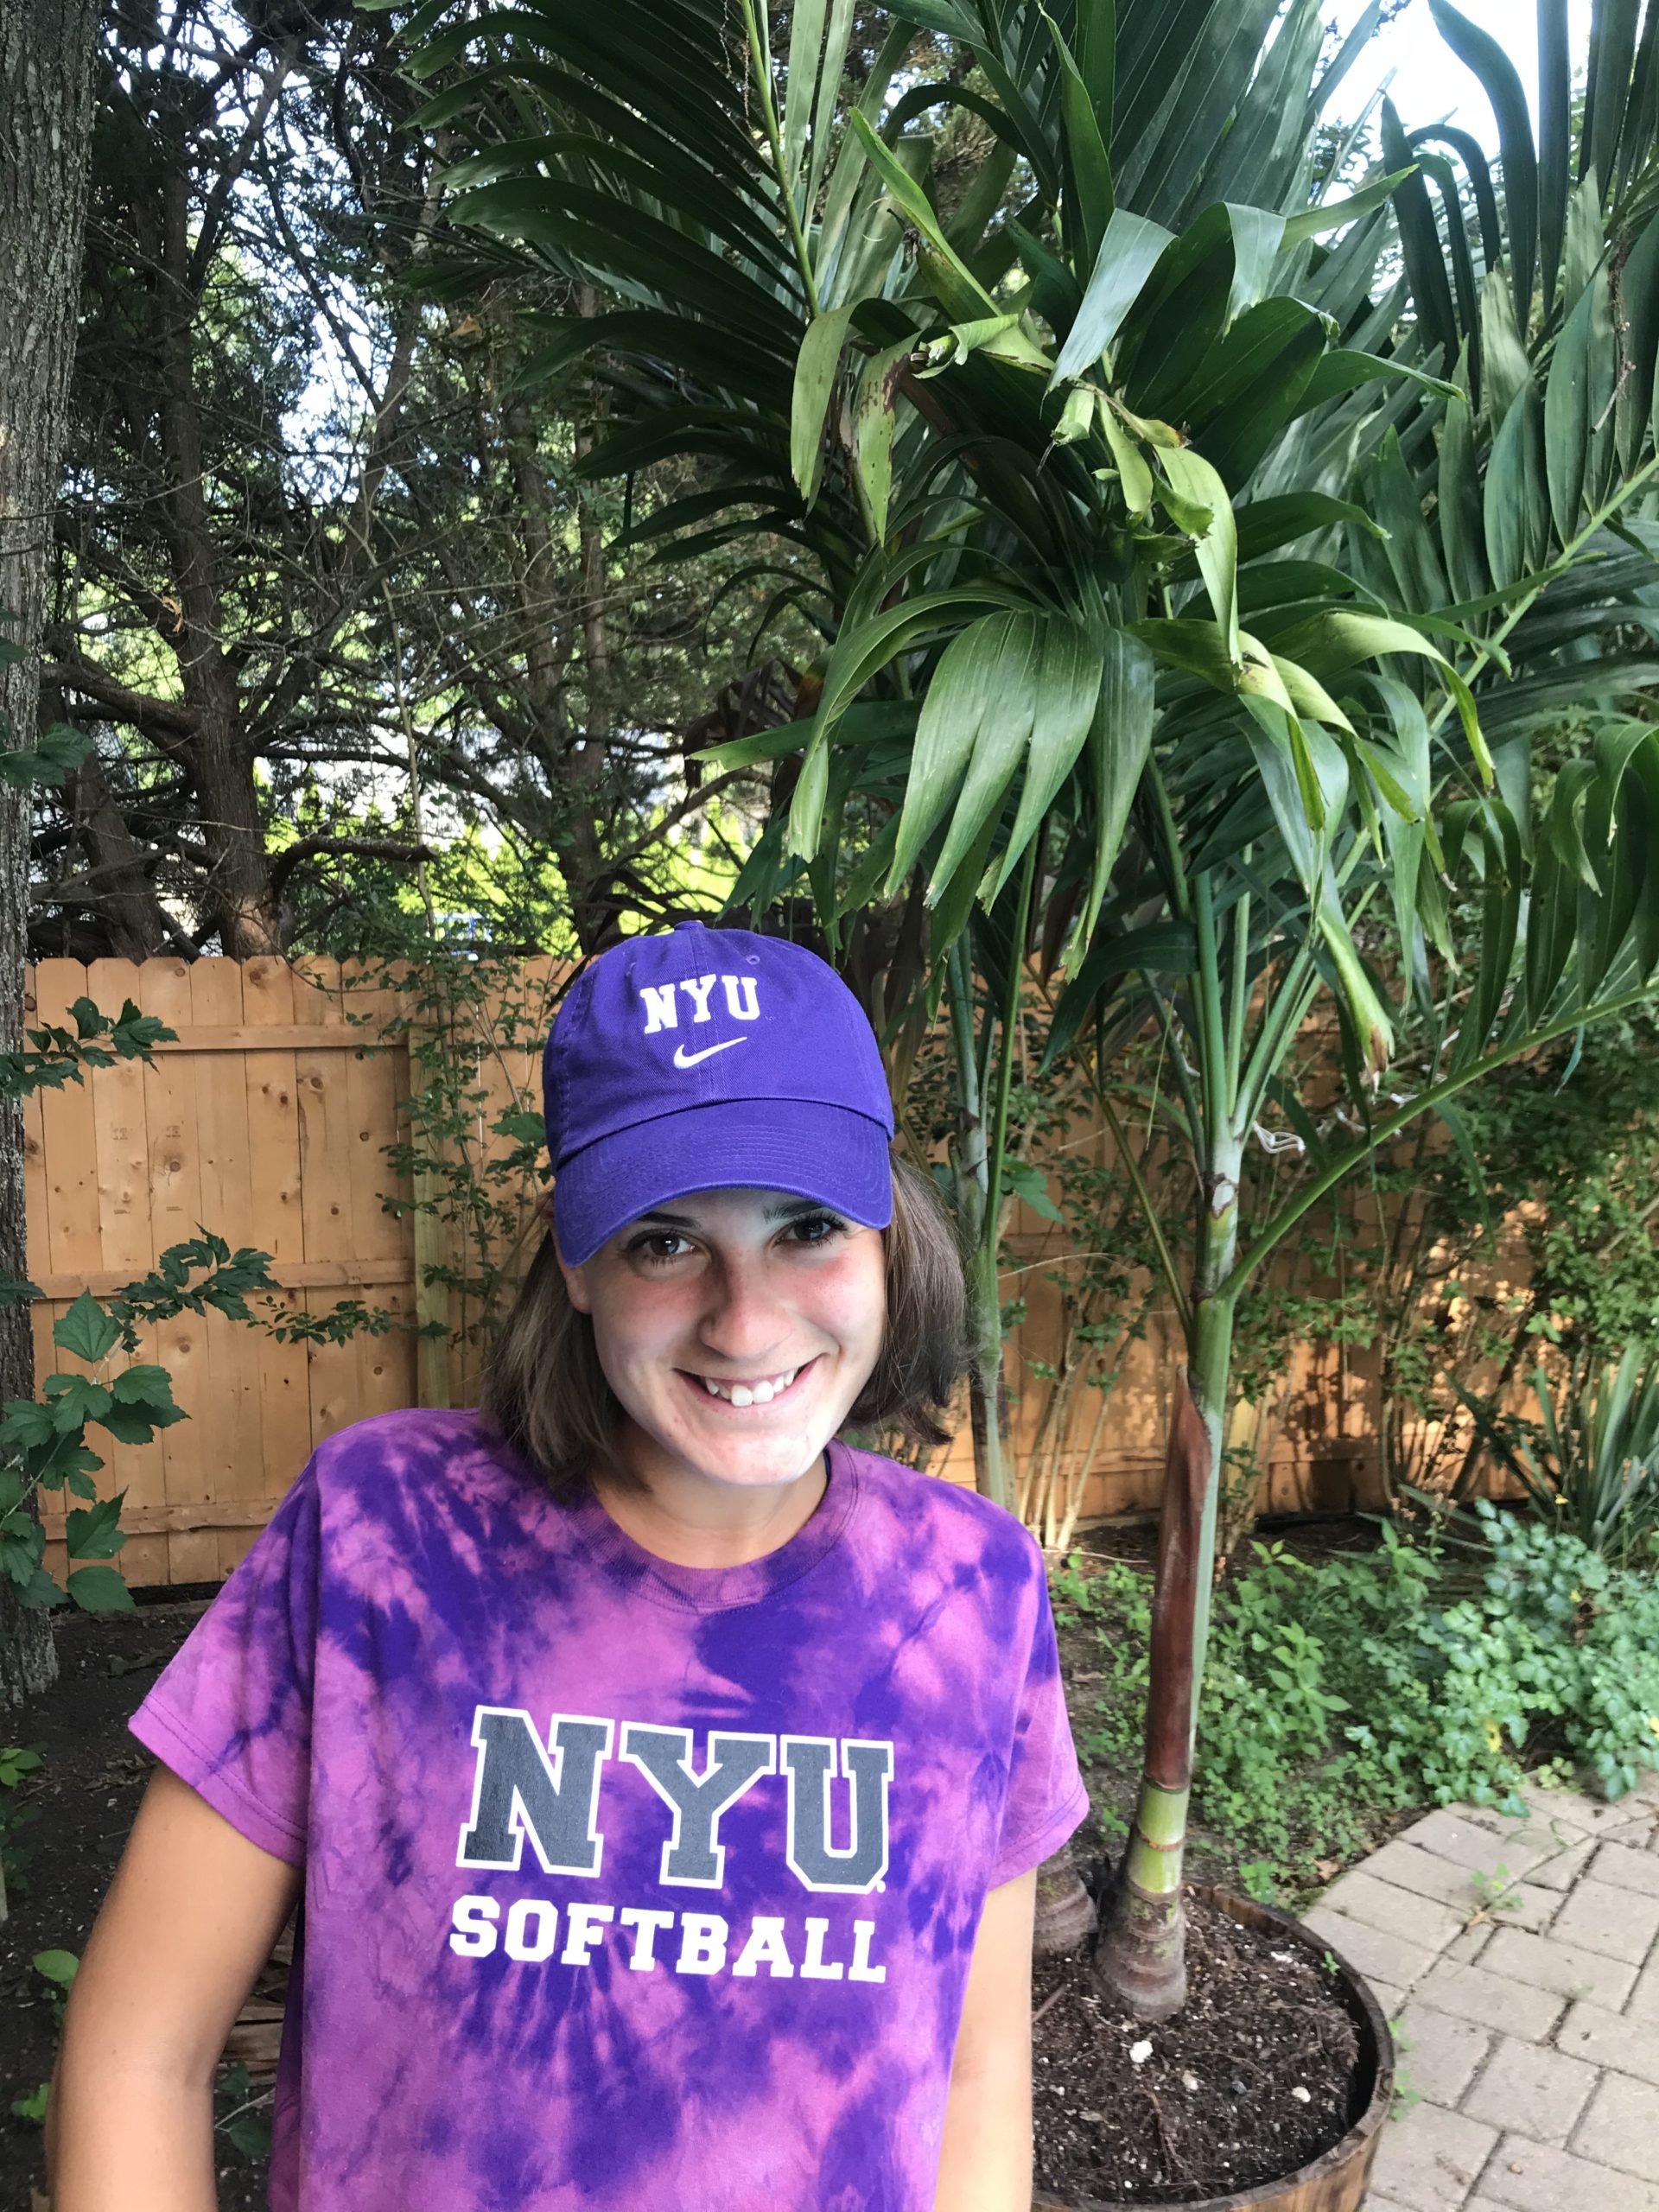 Lily Candelaria is very excited to attend NYU, where she will play on the softball team. 